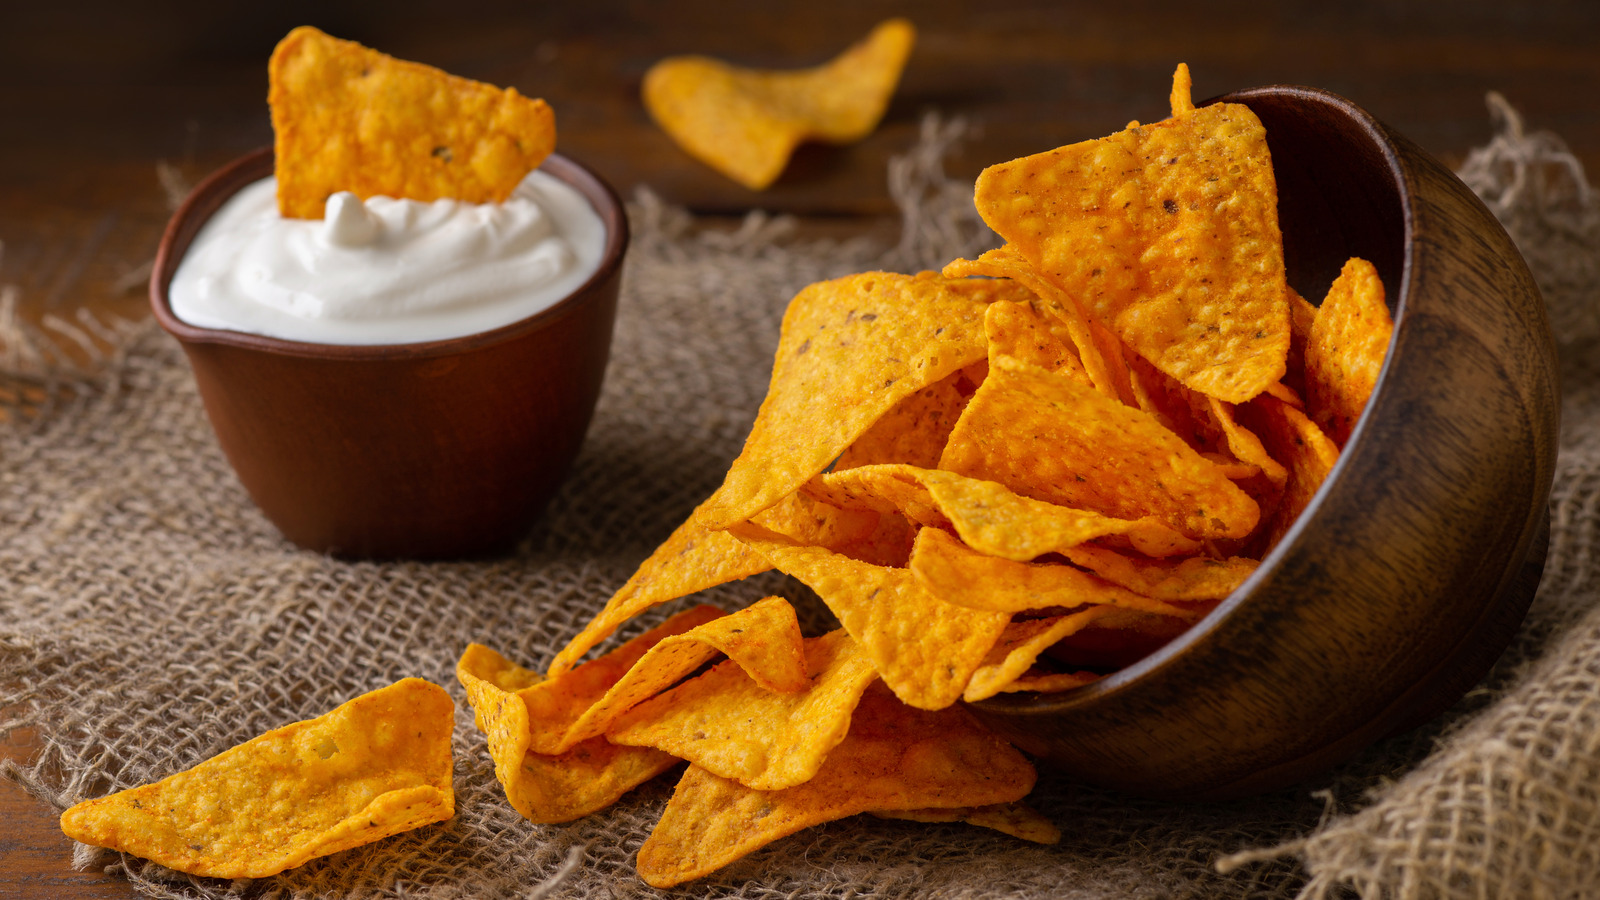 https://www.thedailymeal.com/img/gallery/the-15-unhealthiest-store-bought-tortilla-chips/l-intro-1692032829.jpg